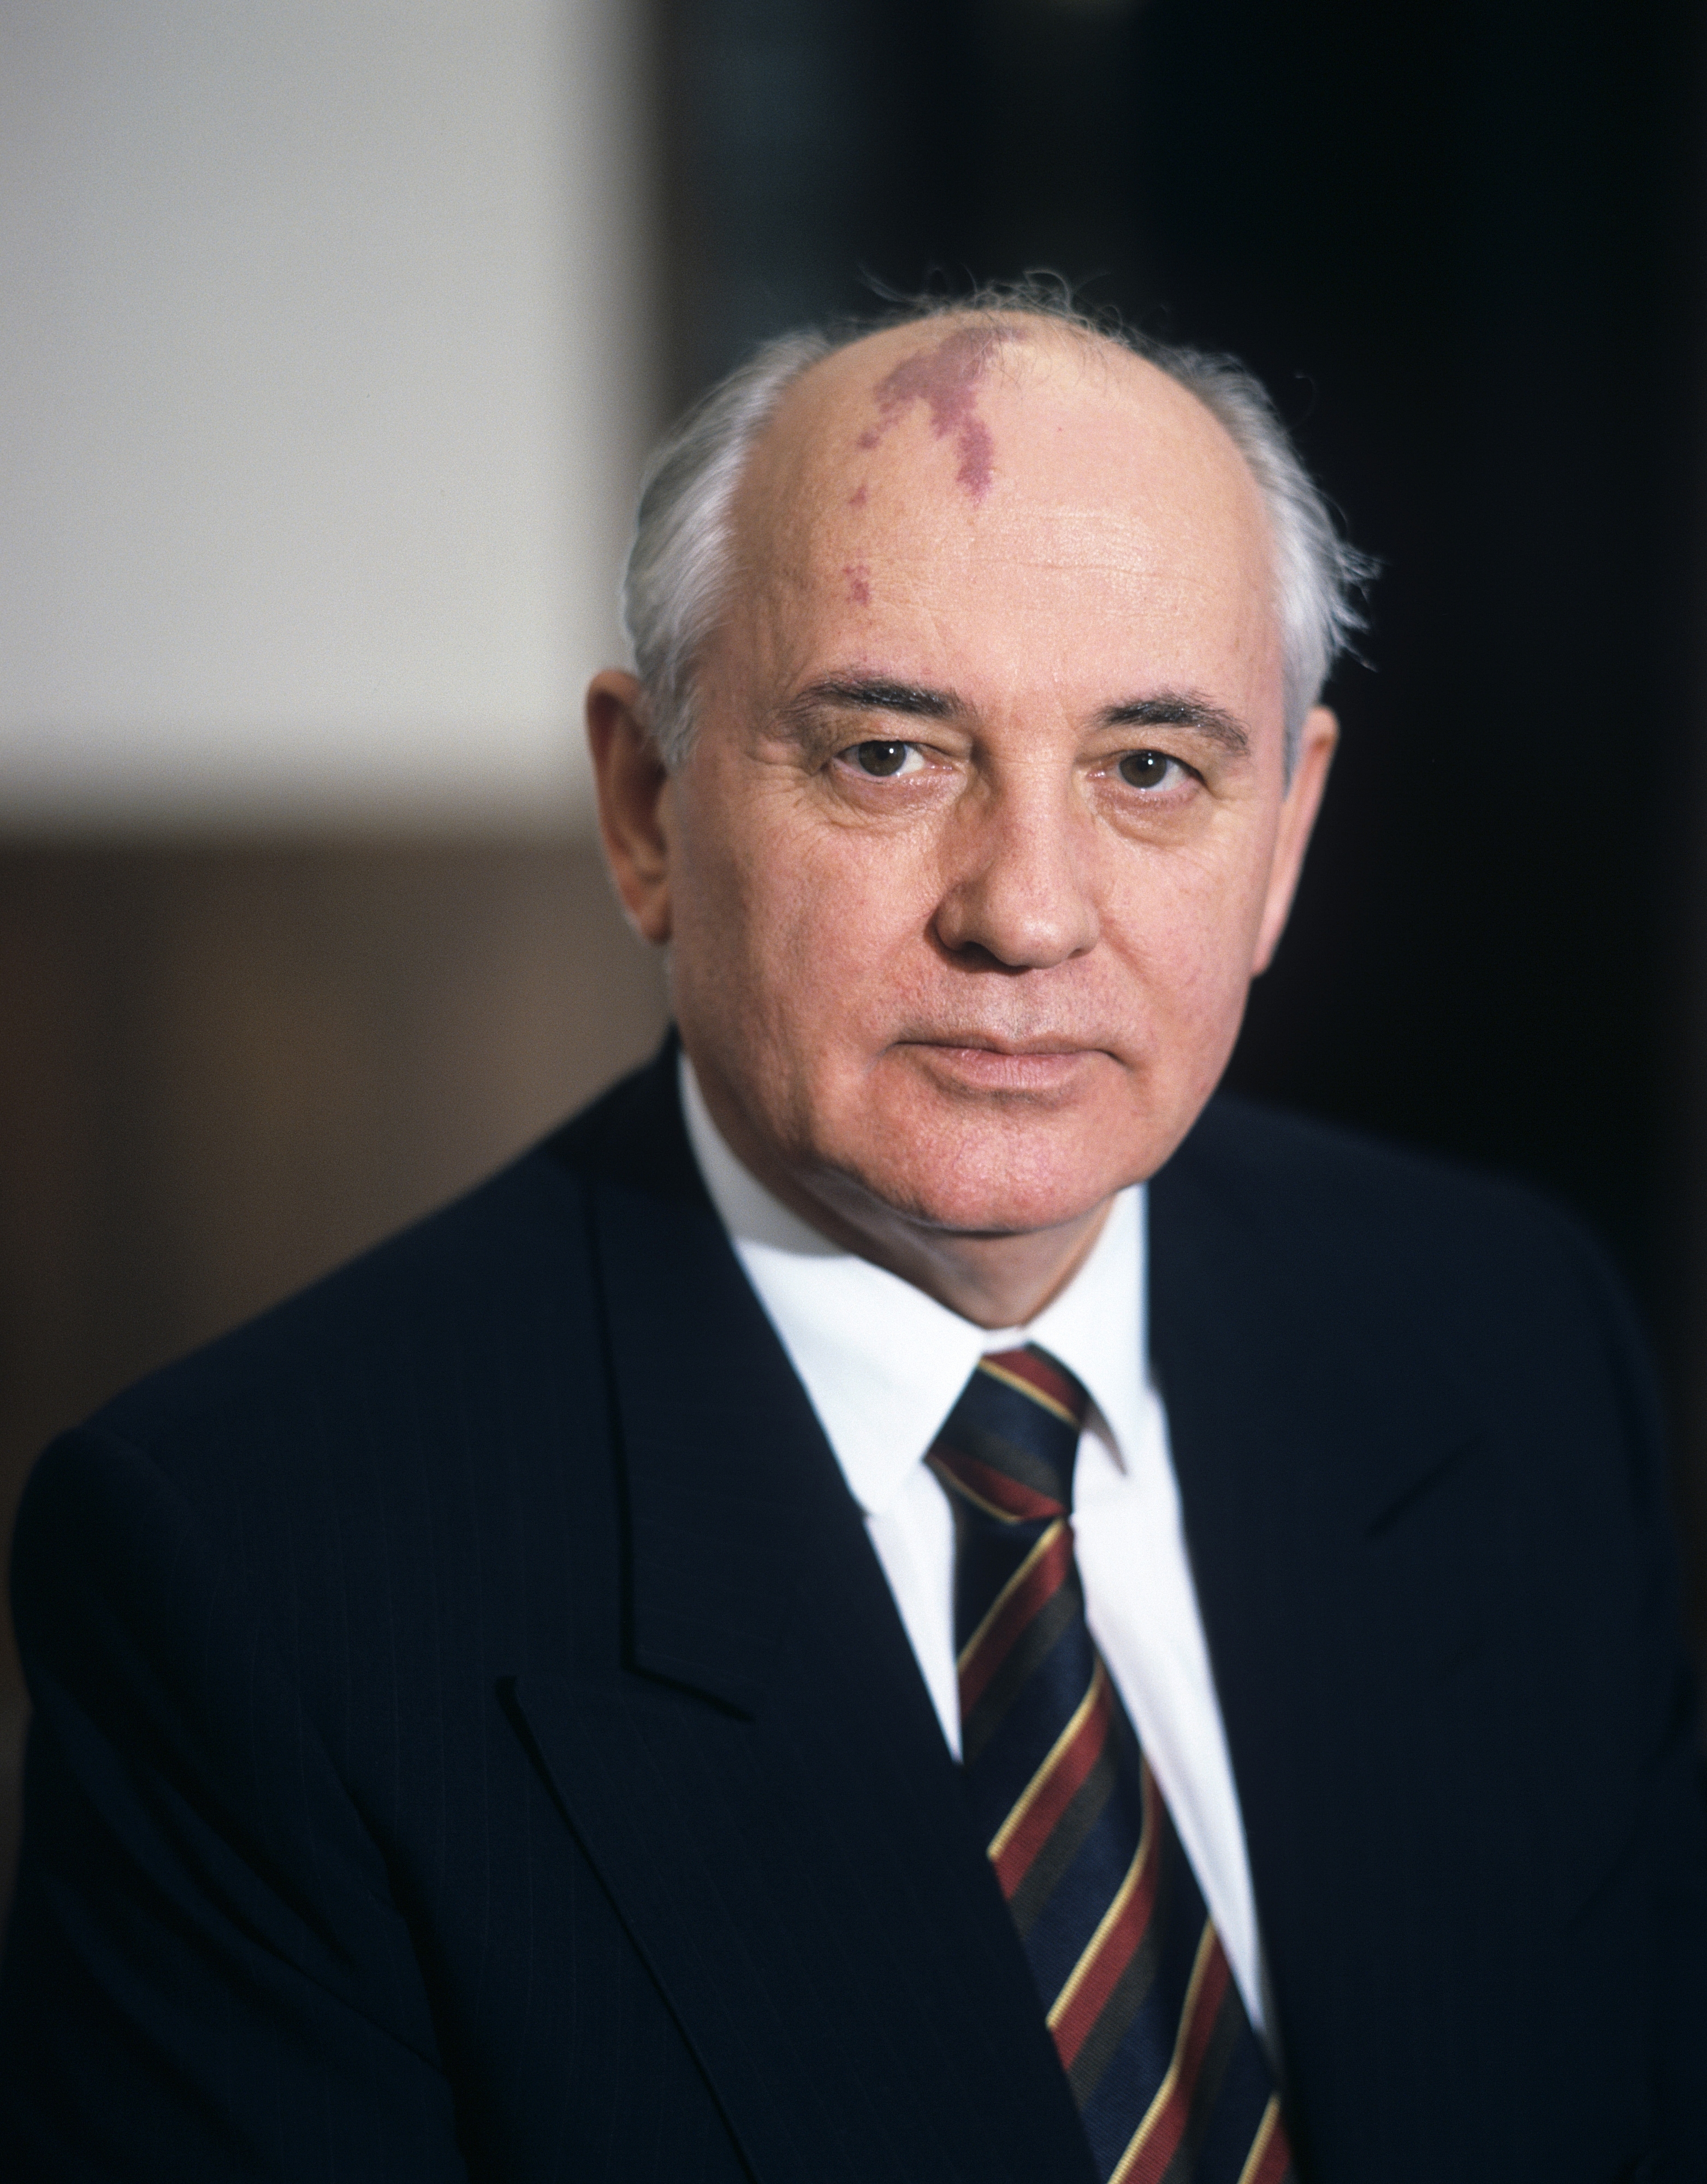 General Secretary of the Central Committee of the Communist Party of the Soviet Union Mikhail Gorbachev in the mid 80's in Moscow, Russia. (Kommersant via Getty Images)